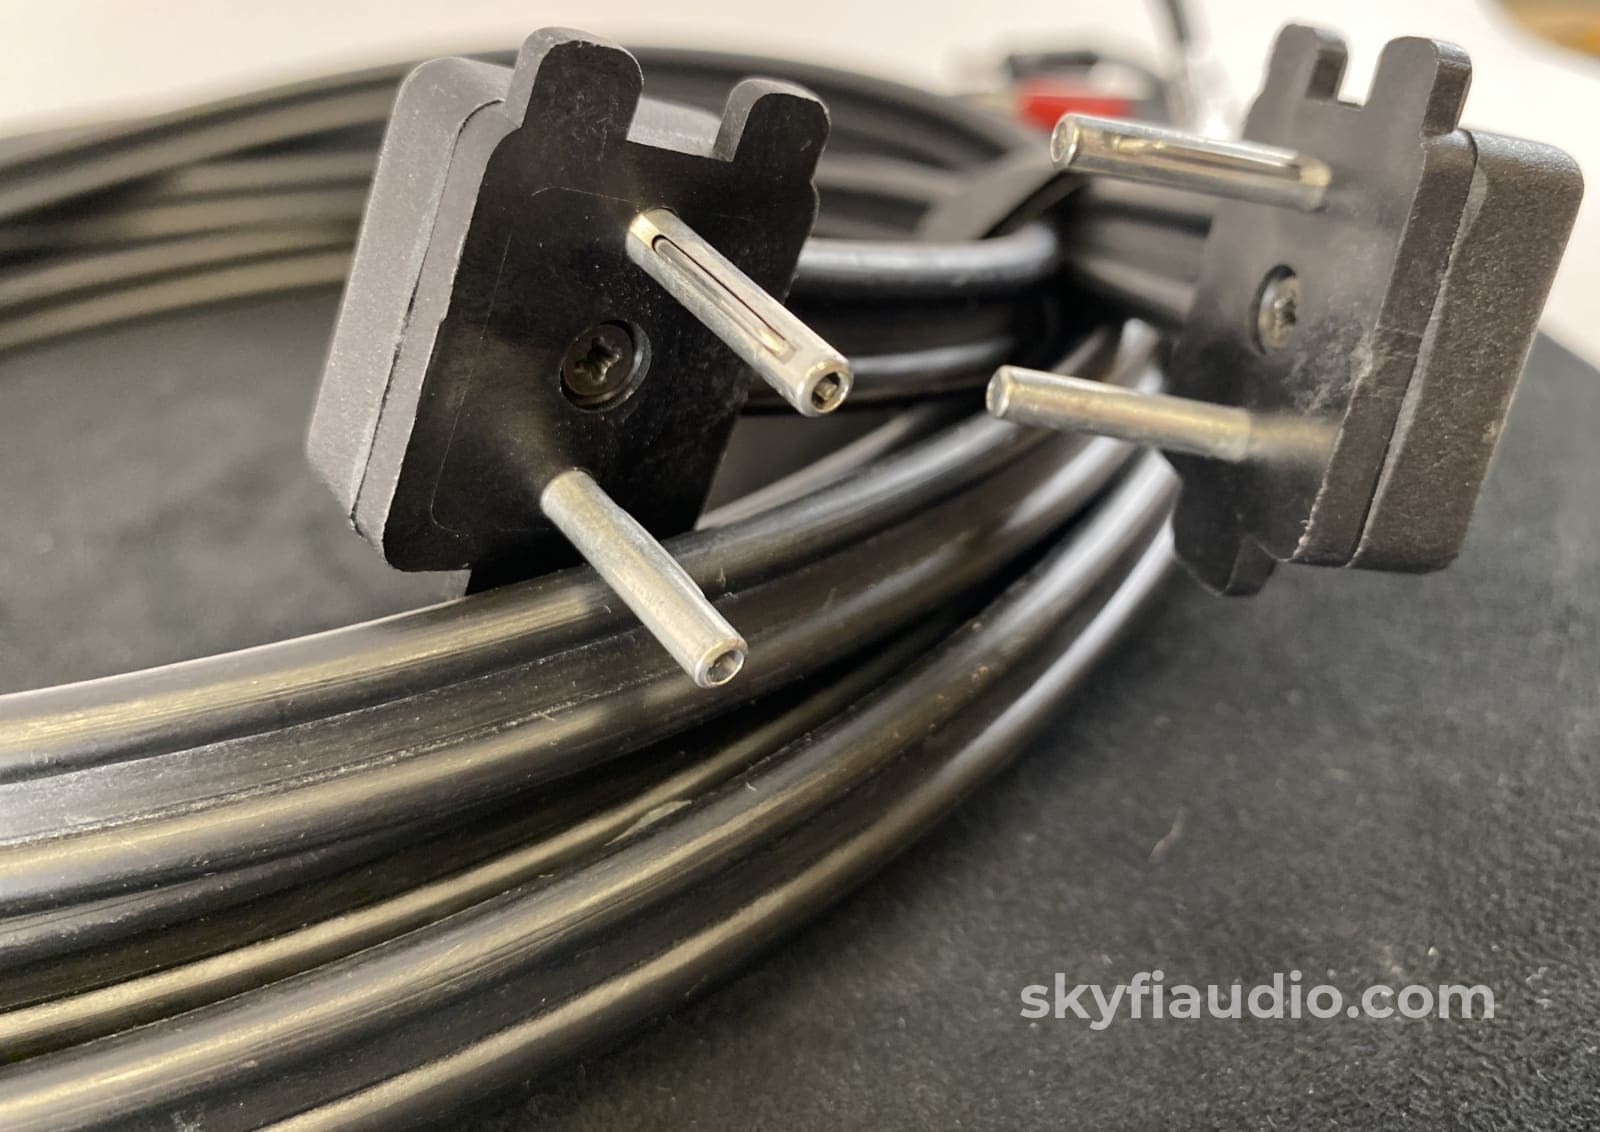 Naim Audio Nac A5 Speaker Cables With Connectors - 12